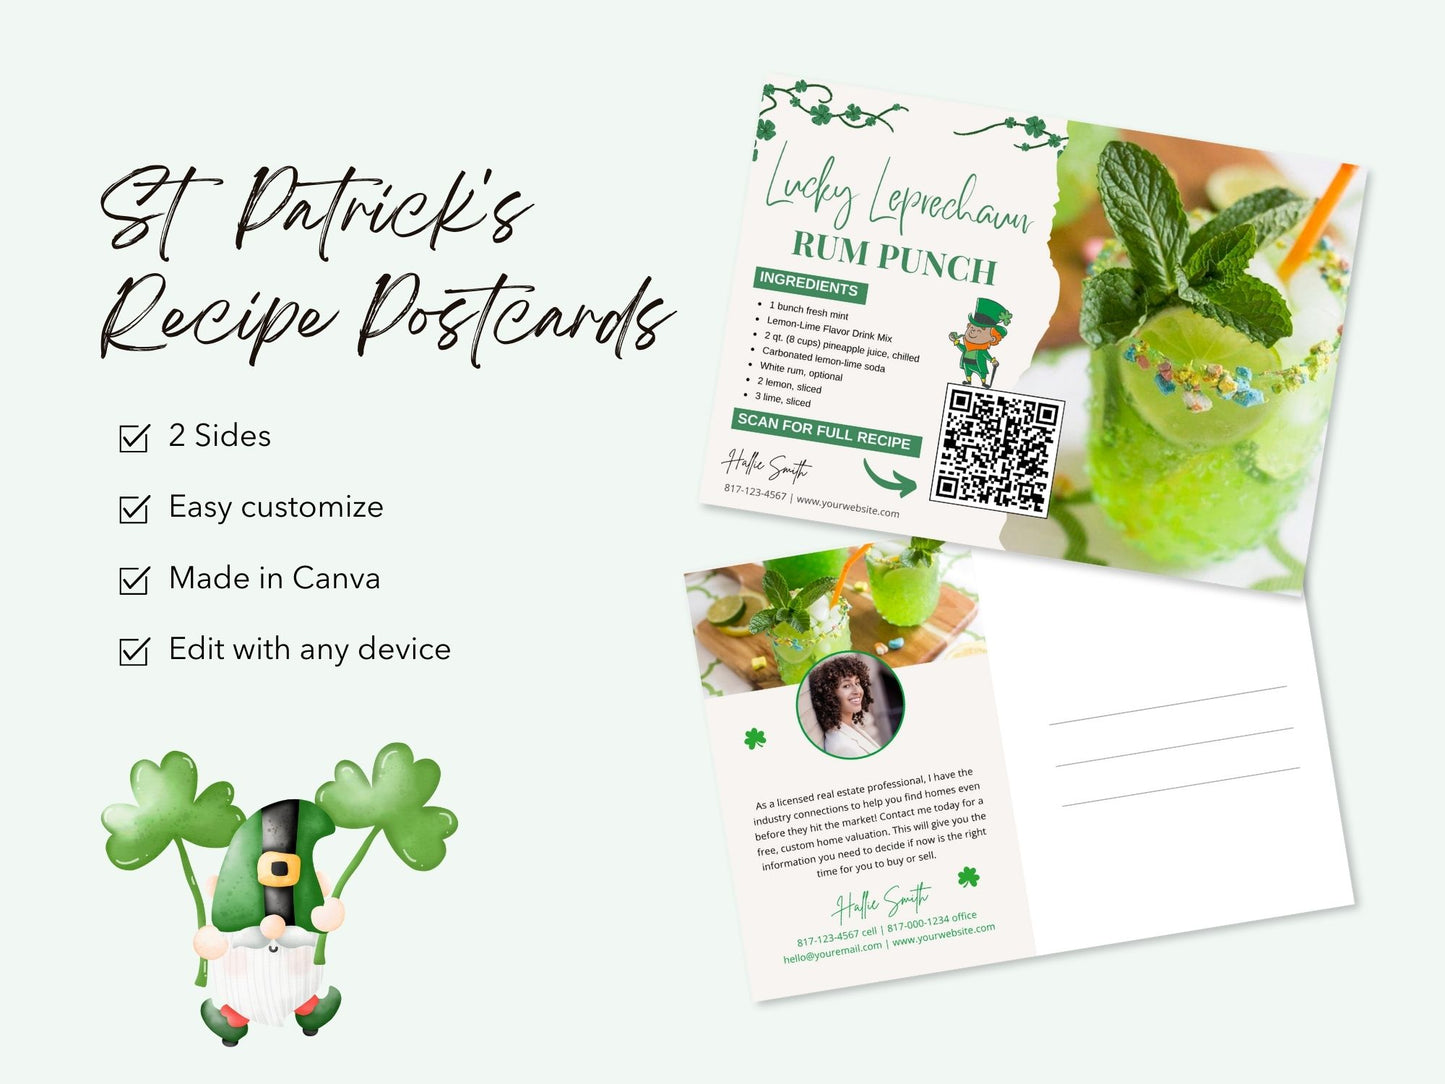 St. Patrick's Recipe Postcard Bundle - Charming and professionally designed postcards featuring delightful St. Patrick's Day recipes.